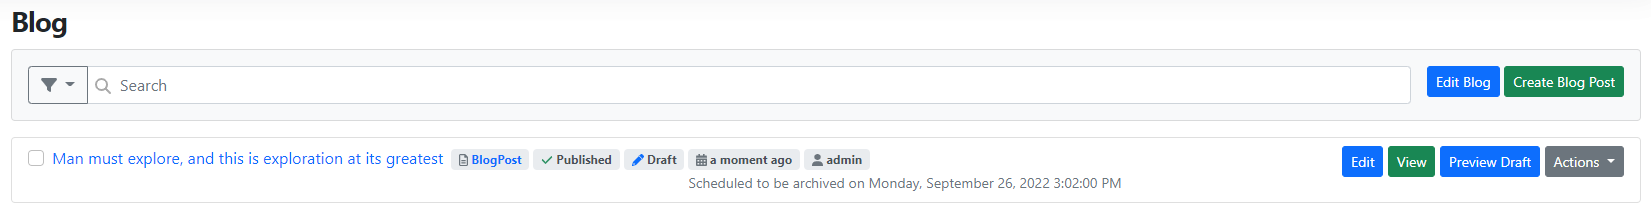 A content item which is scheduled to be archived